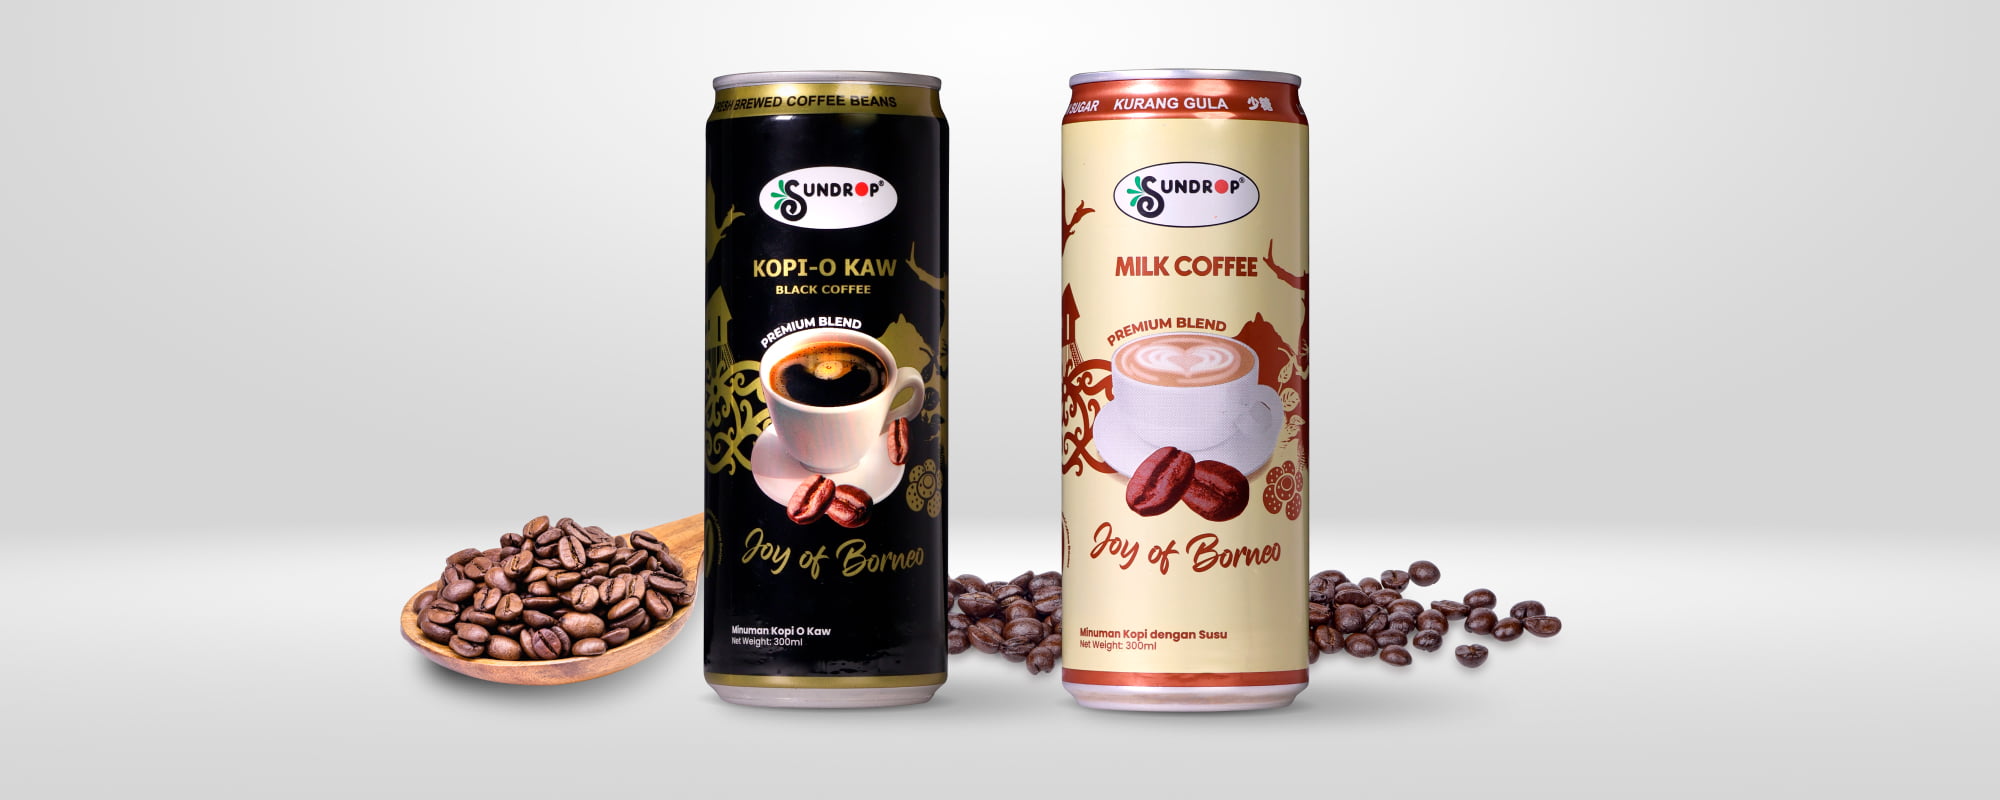 Sundrop Coffee products